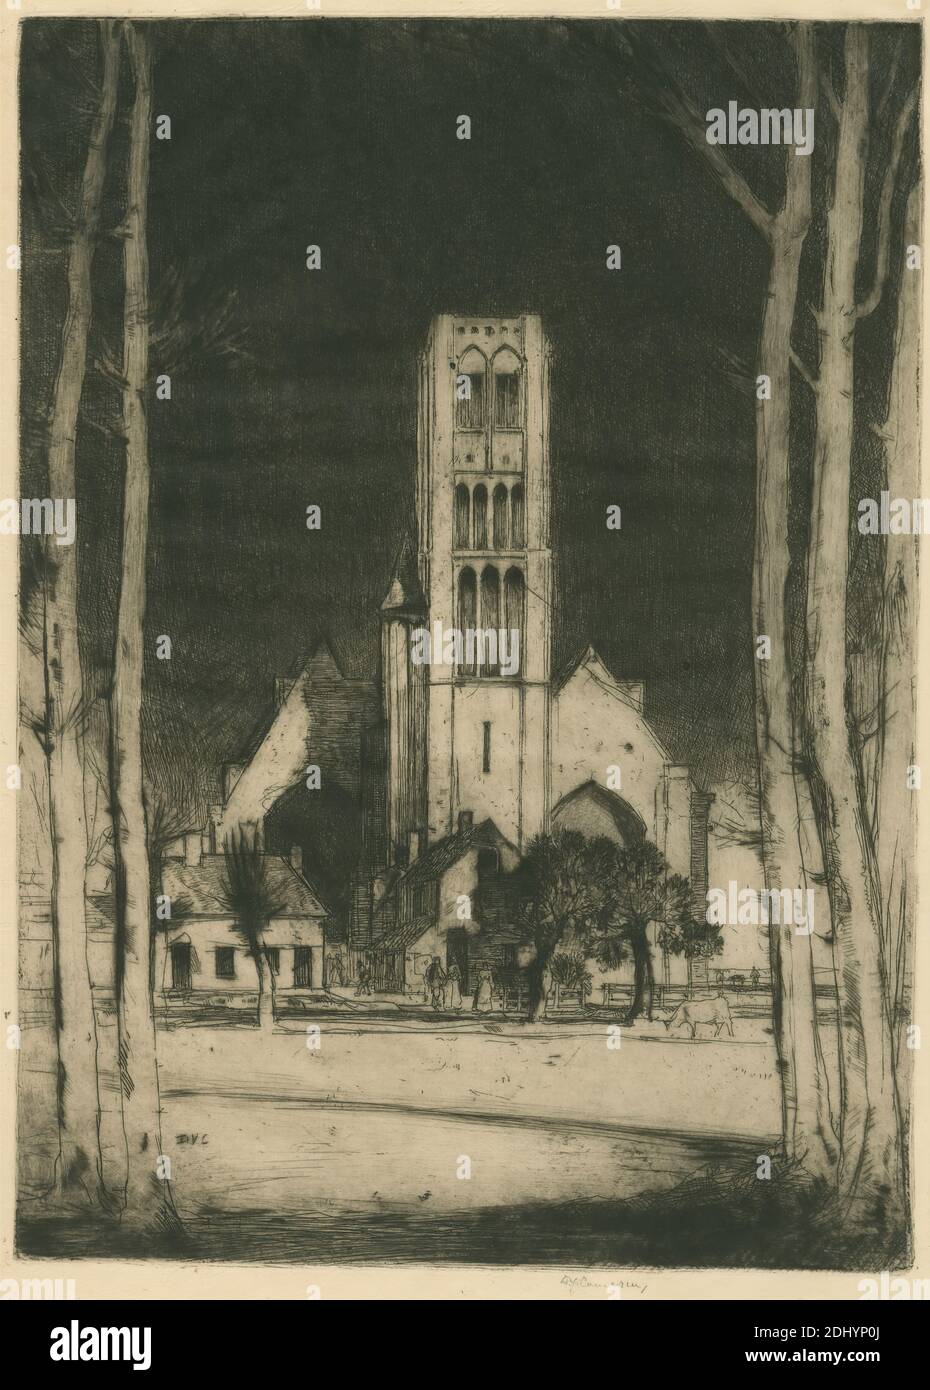 Belgian Set: Damme No. 5, Sir David Young Cameron, 1865–1945, British, 1907, Etching and drypoint, arches, buildings, chimneys (architectural elements), church, church tower, cow, fences, gables, man, shadows, trees, trunks, turret, windows, women, Belgium, Church of our Lady, Damme, Europe, Flanders, West Flanders Stock Photo